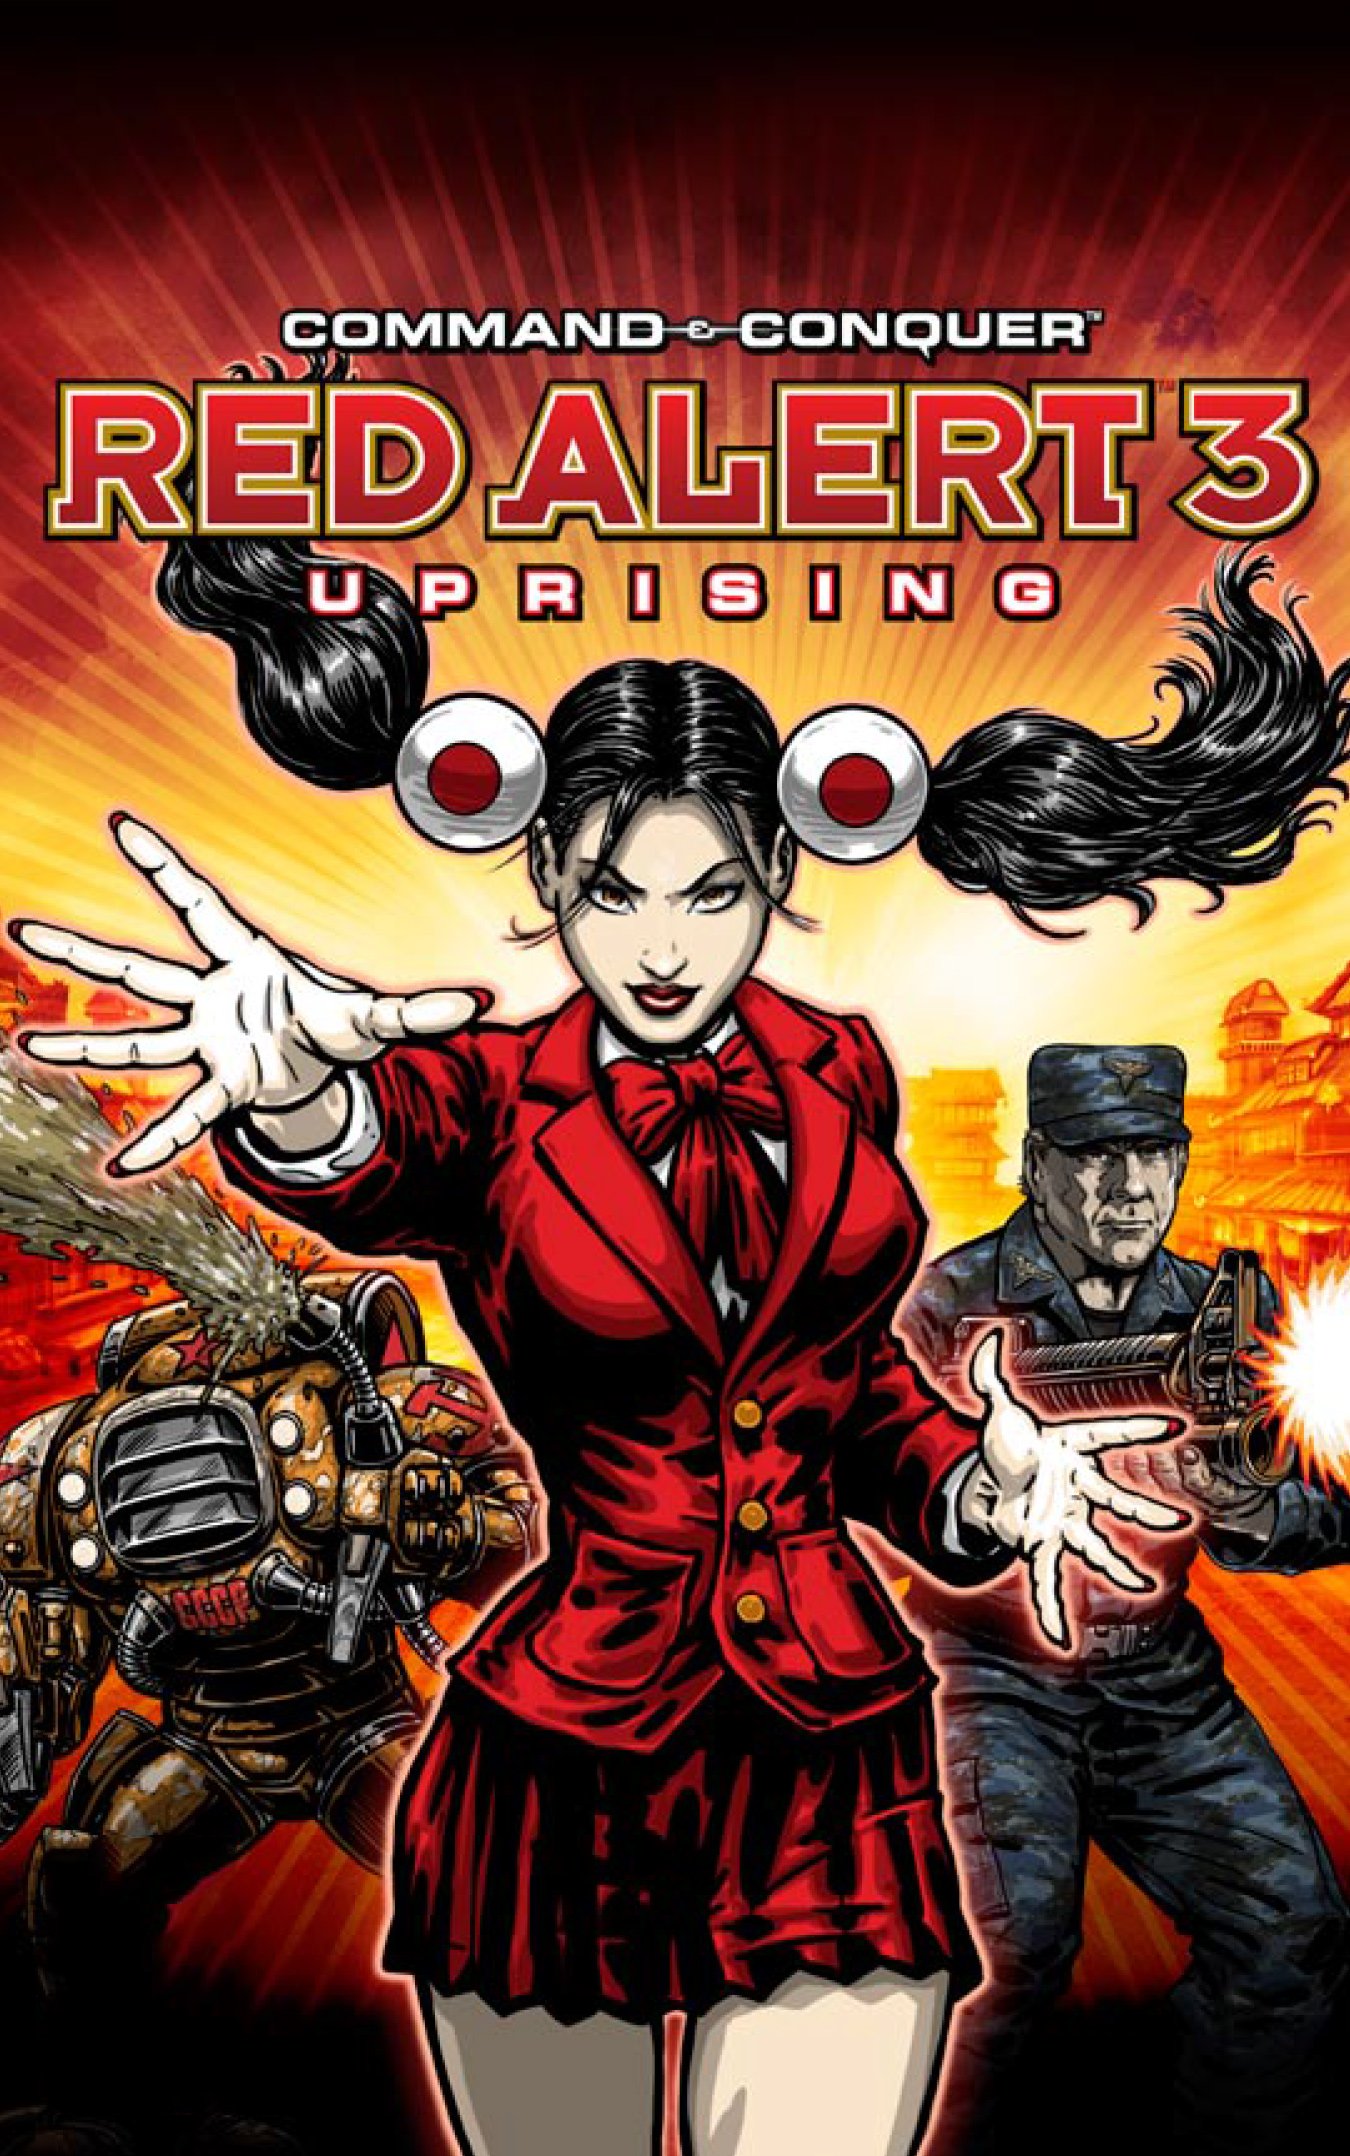 & Conquer: Red Alert 3 Download for Free - 2023 Latest Version